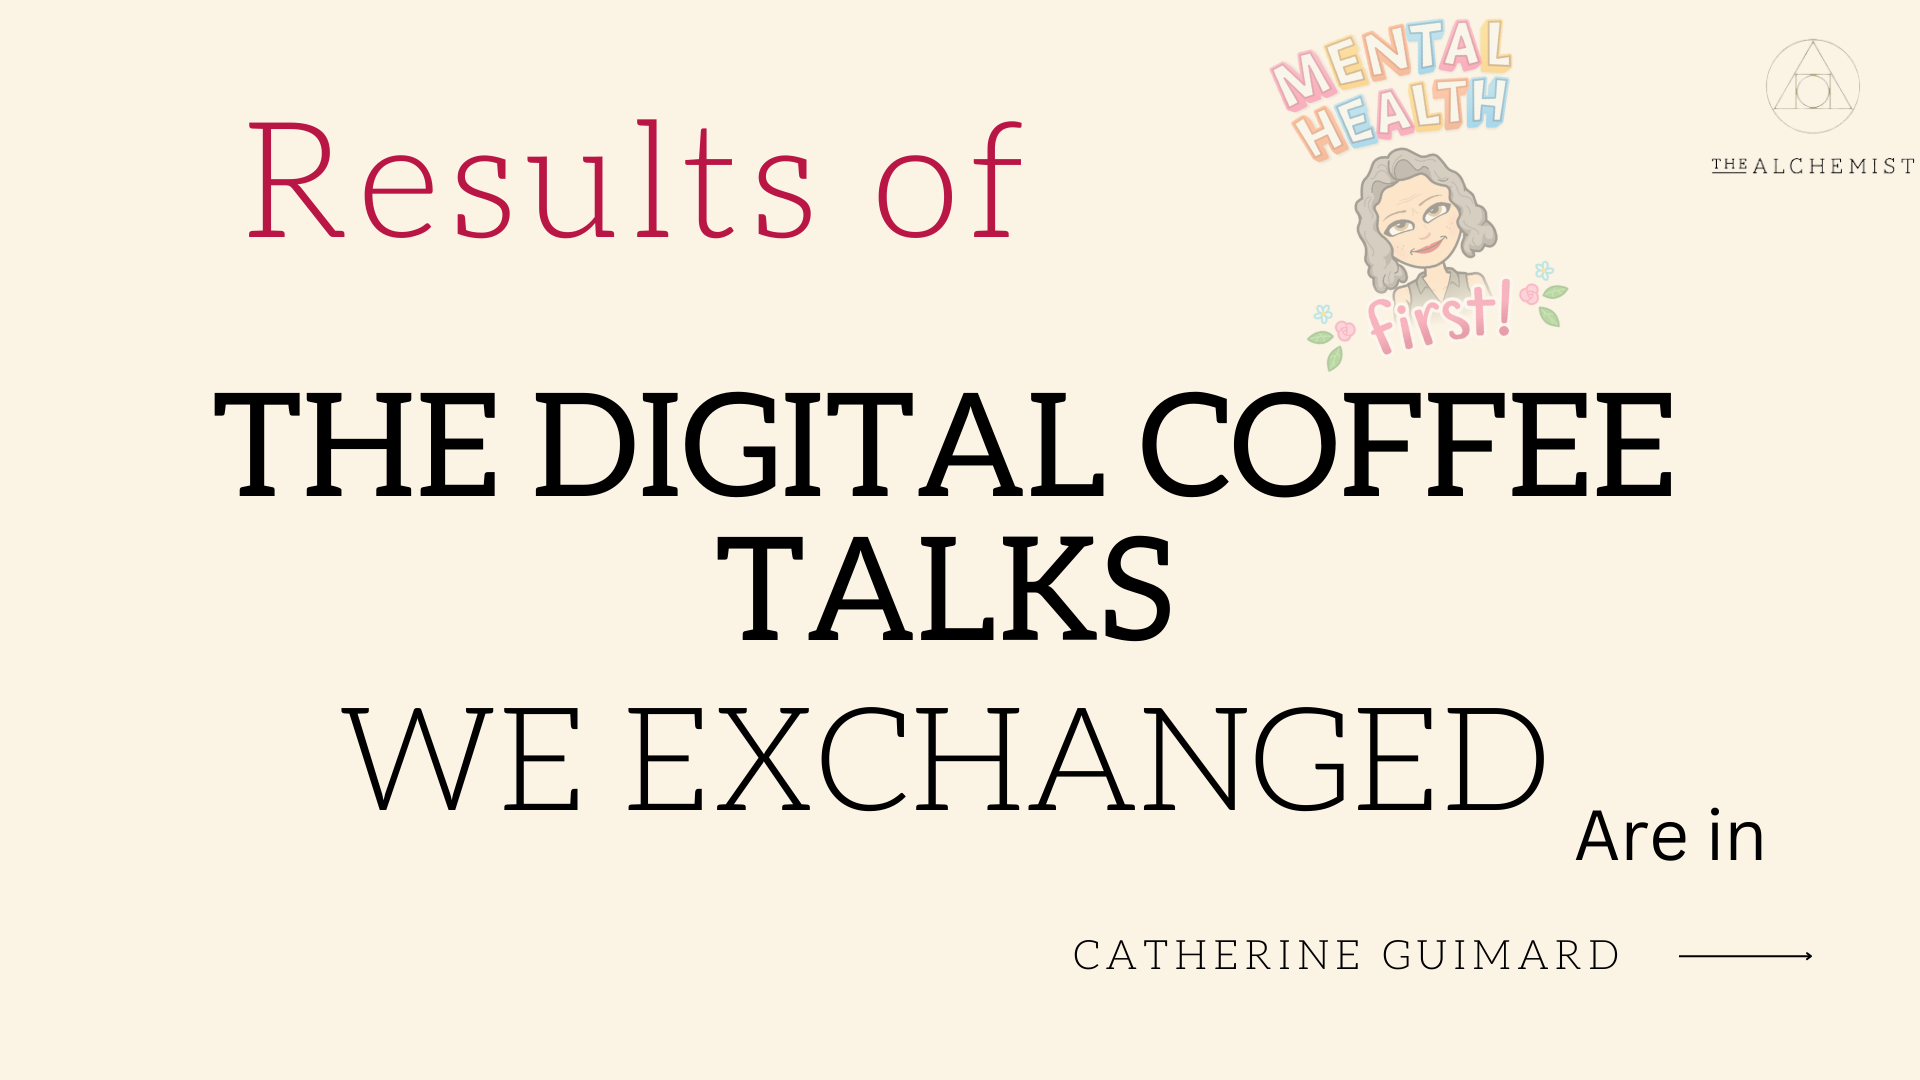 Results of the digital coffee talks we exchanged are in...